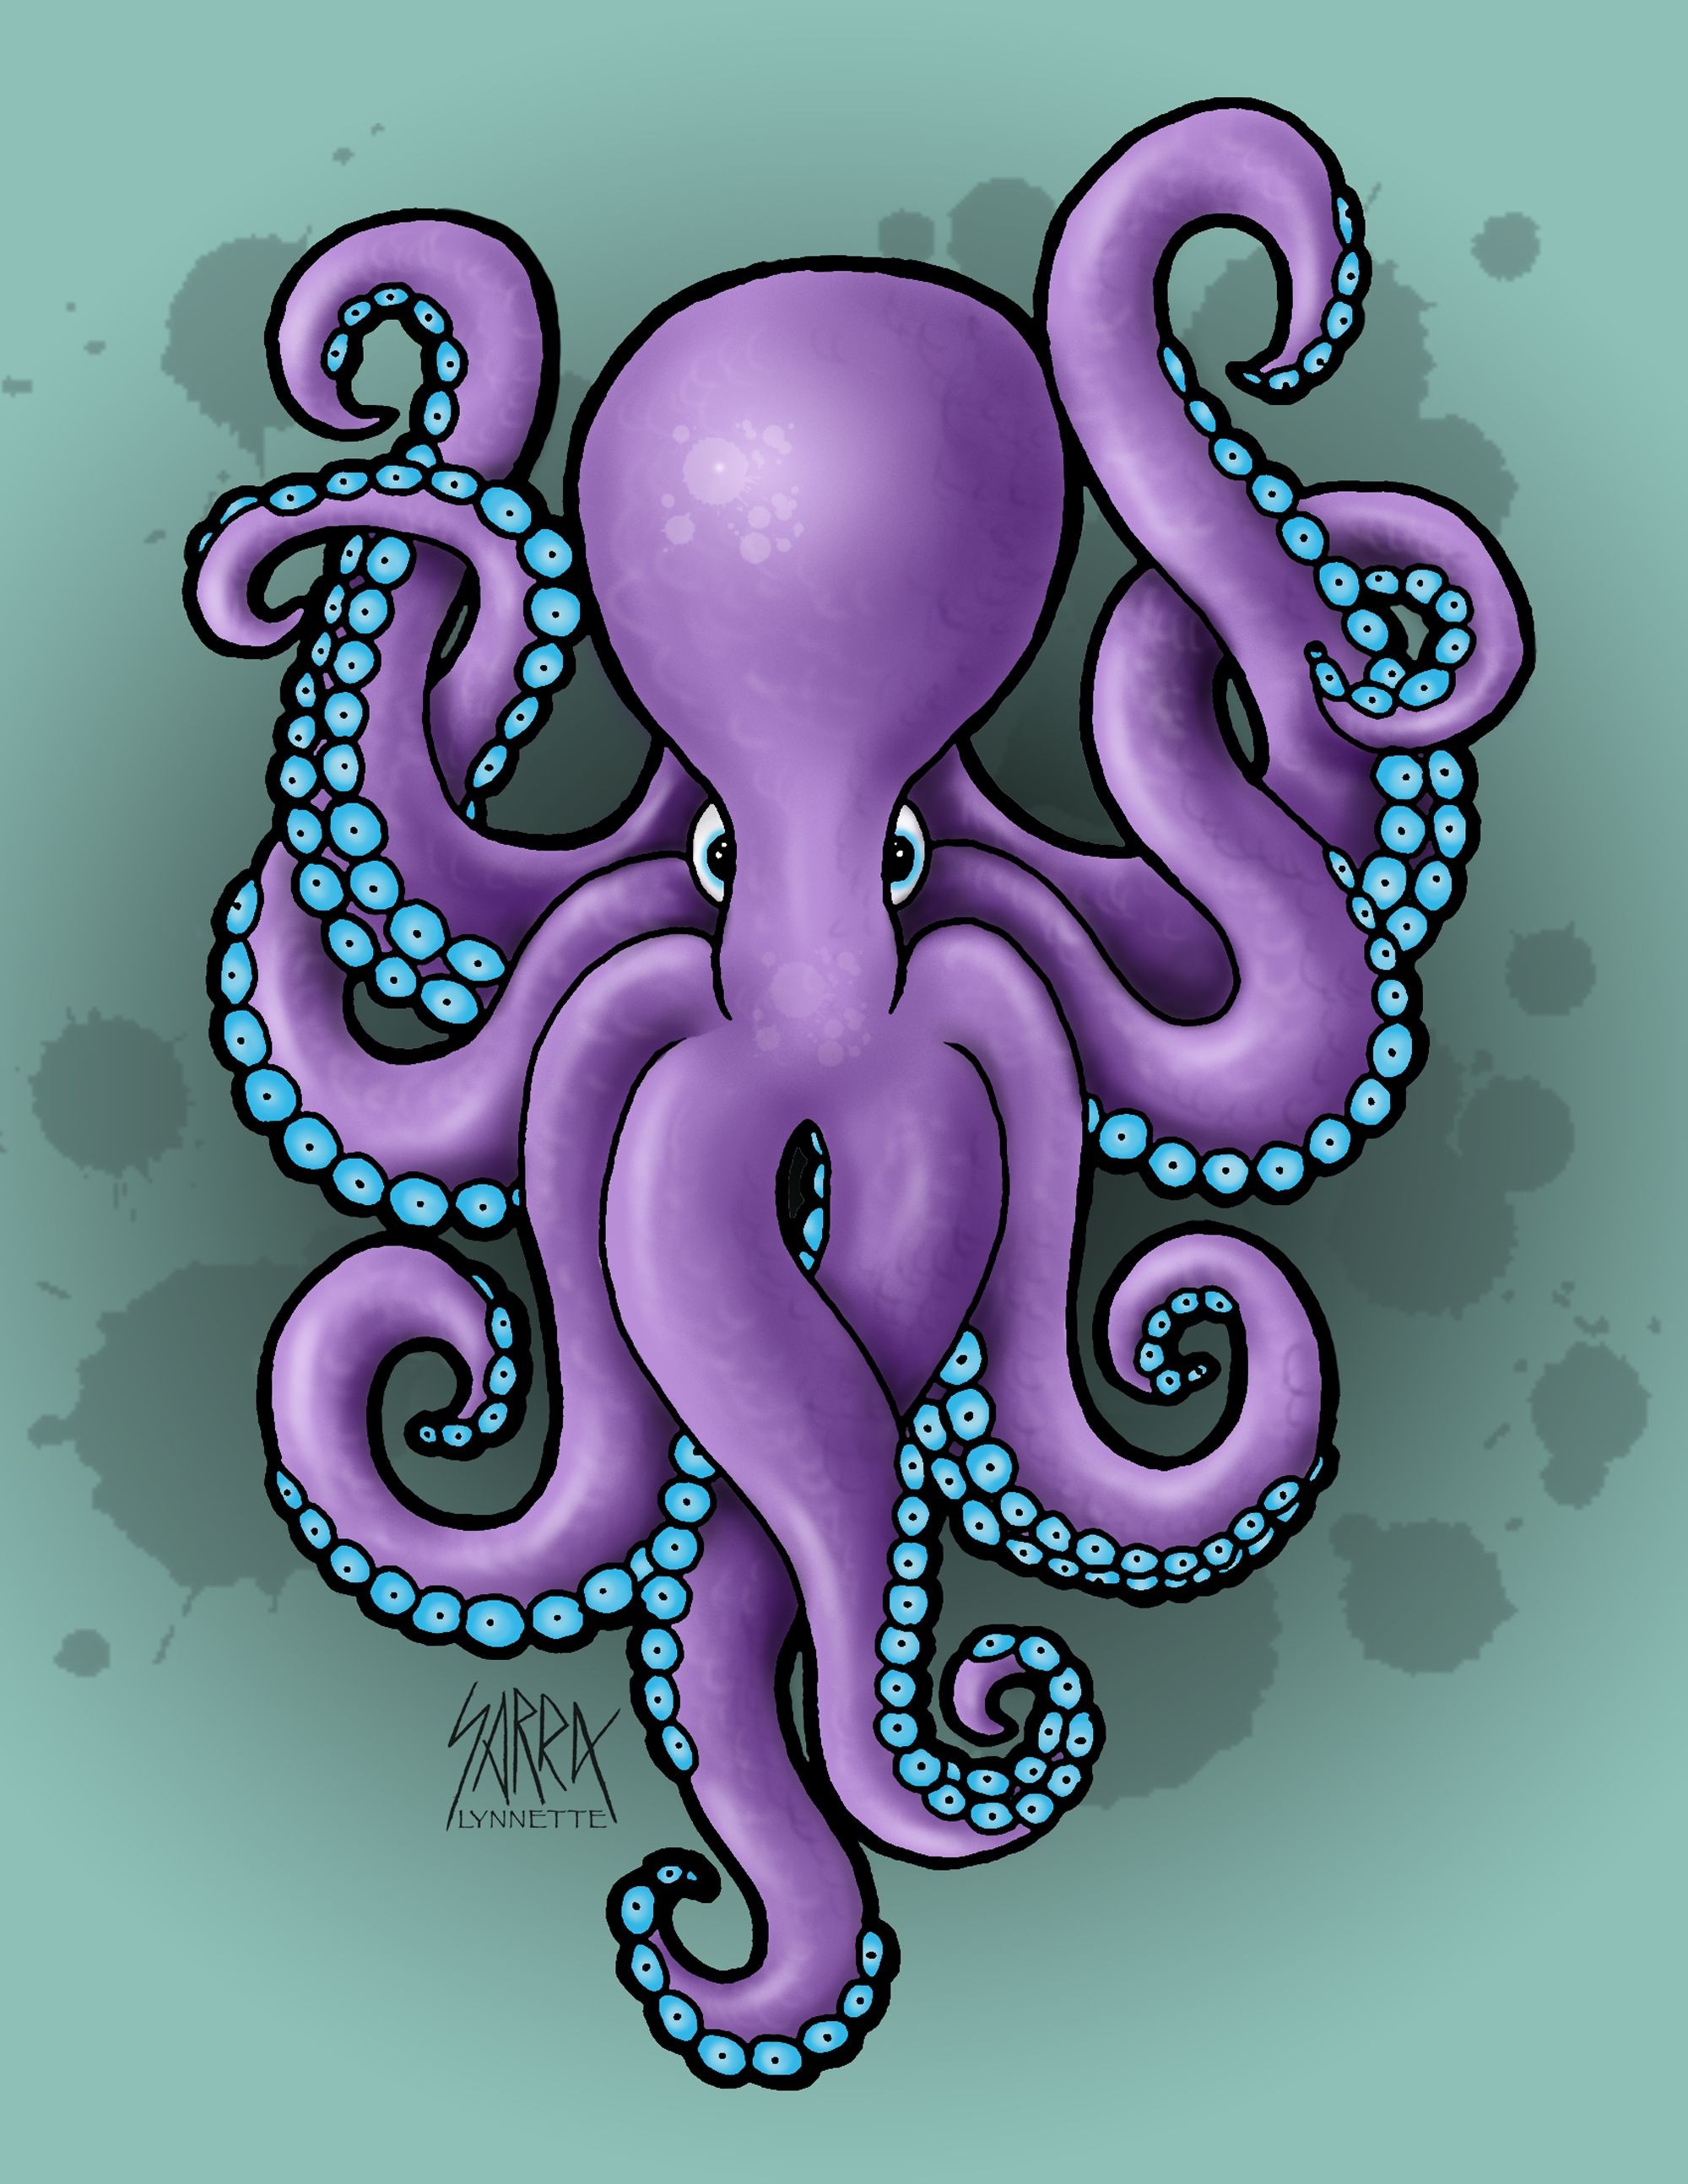 Octopus Papercraft Graphic Art From Photoshop Of Purple Octopus by Sarra Lynnette